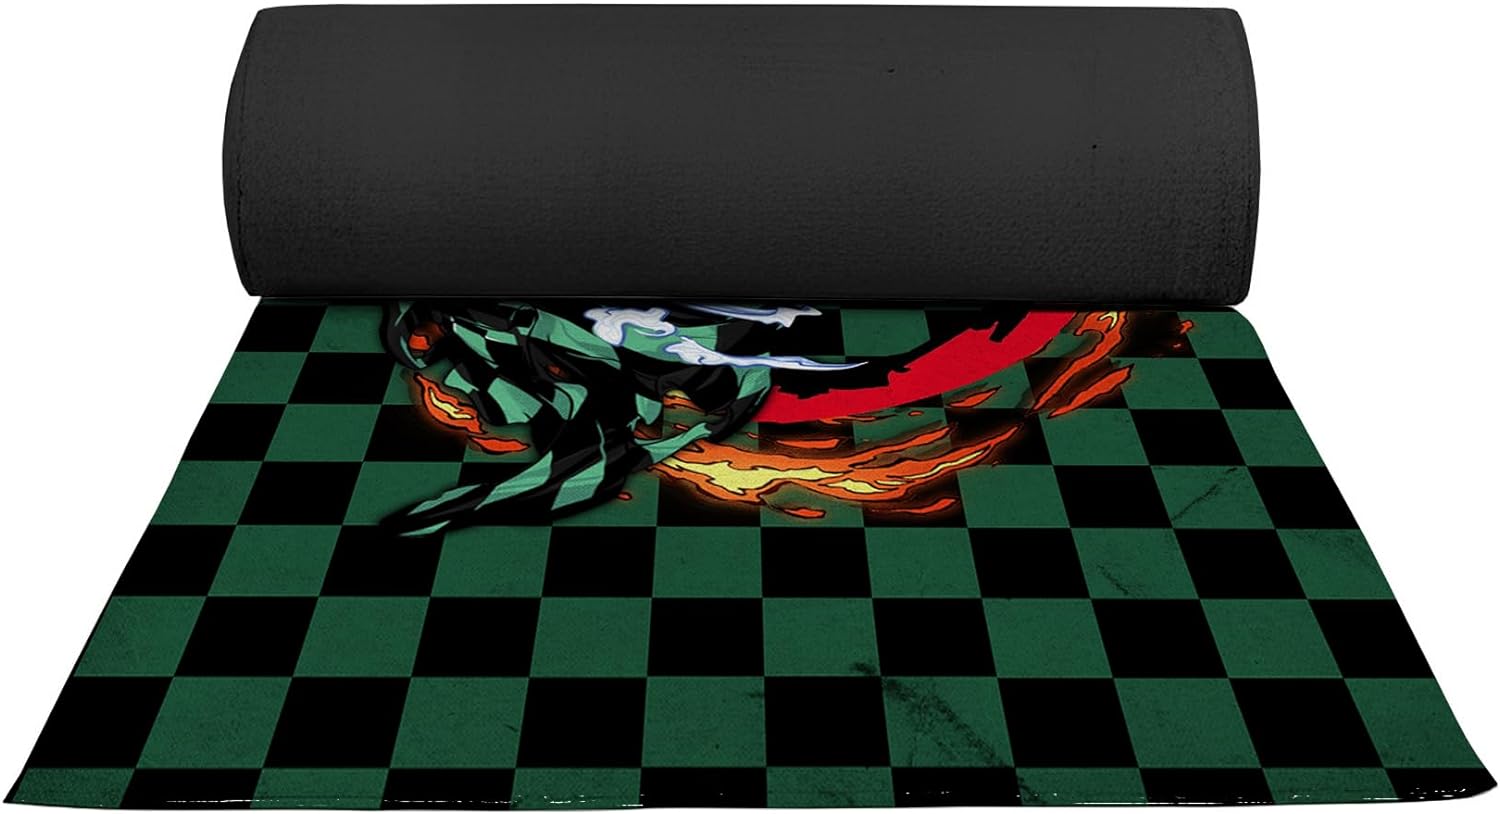 Anime Inspired Gaming Rug - 62x40 inches, Gamer Room Decor, Non-slip backing, Premium quality